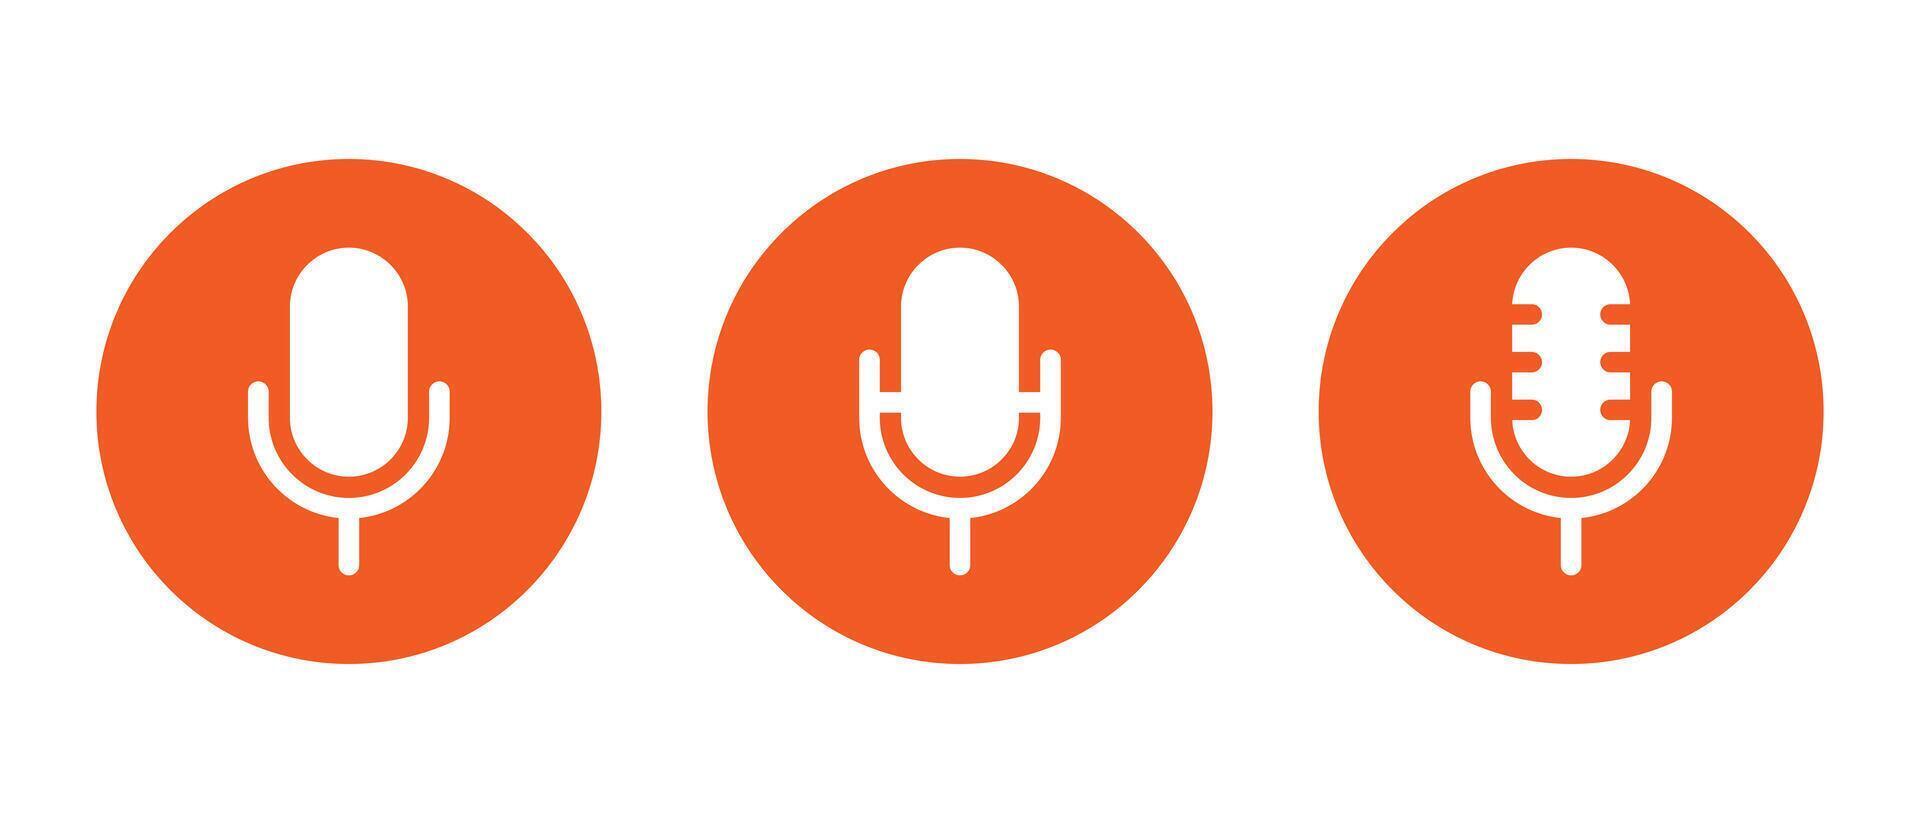 Mic icon set on red circle. Microphone, voice recorder sign symbol in flat design vector